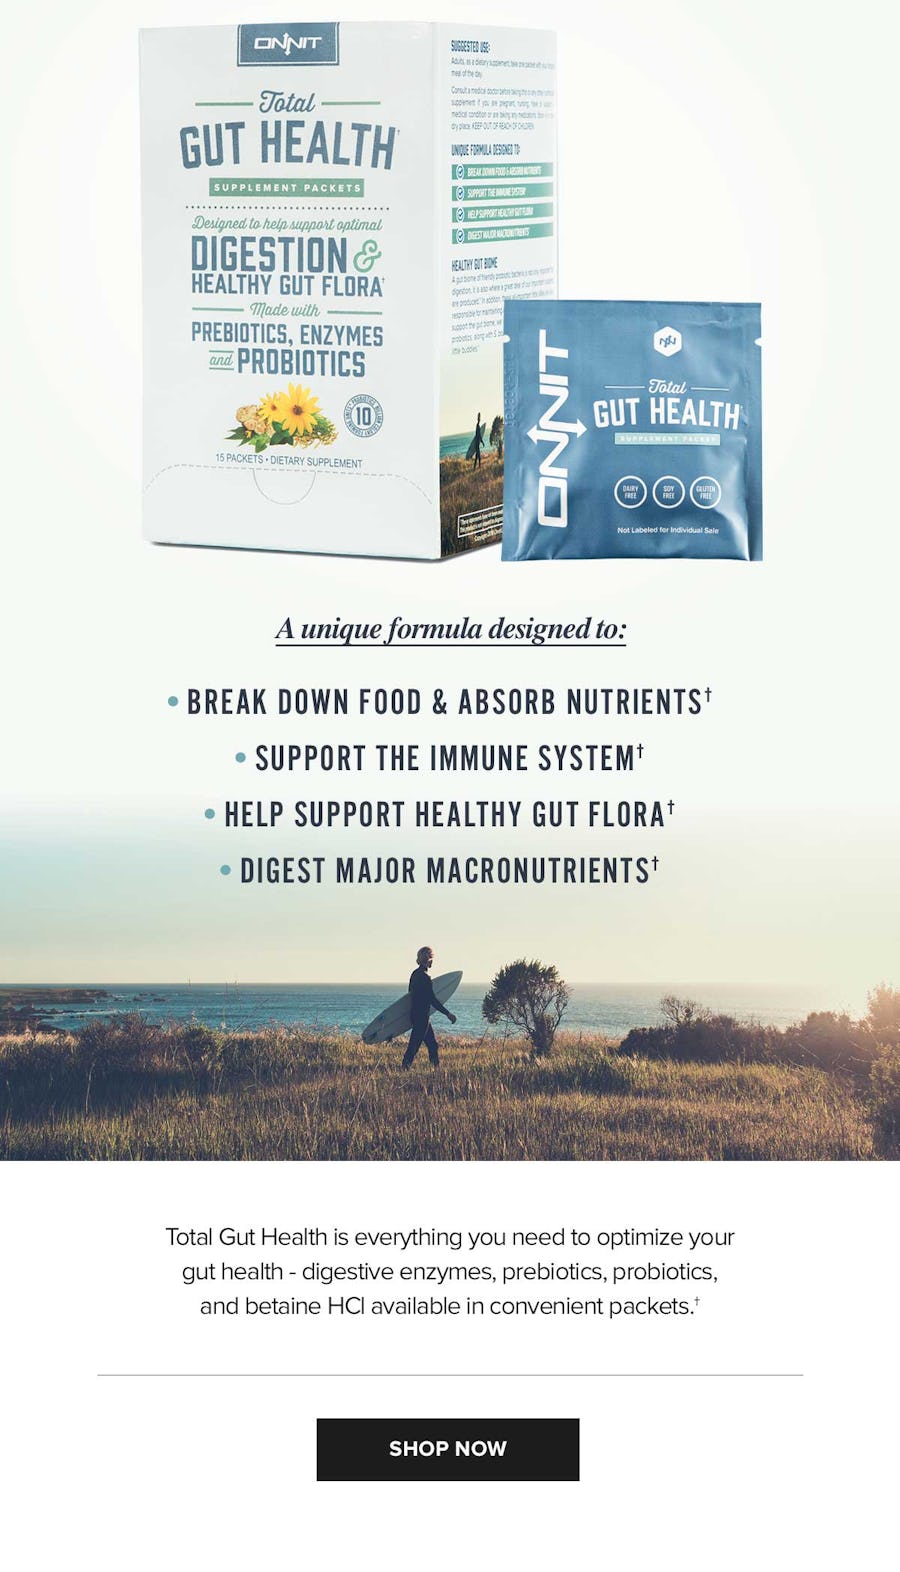 Introducing the Total Gut Health Supplement Packets